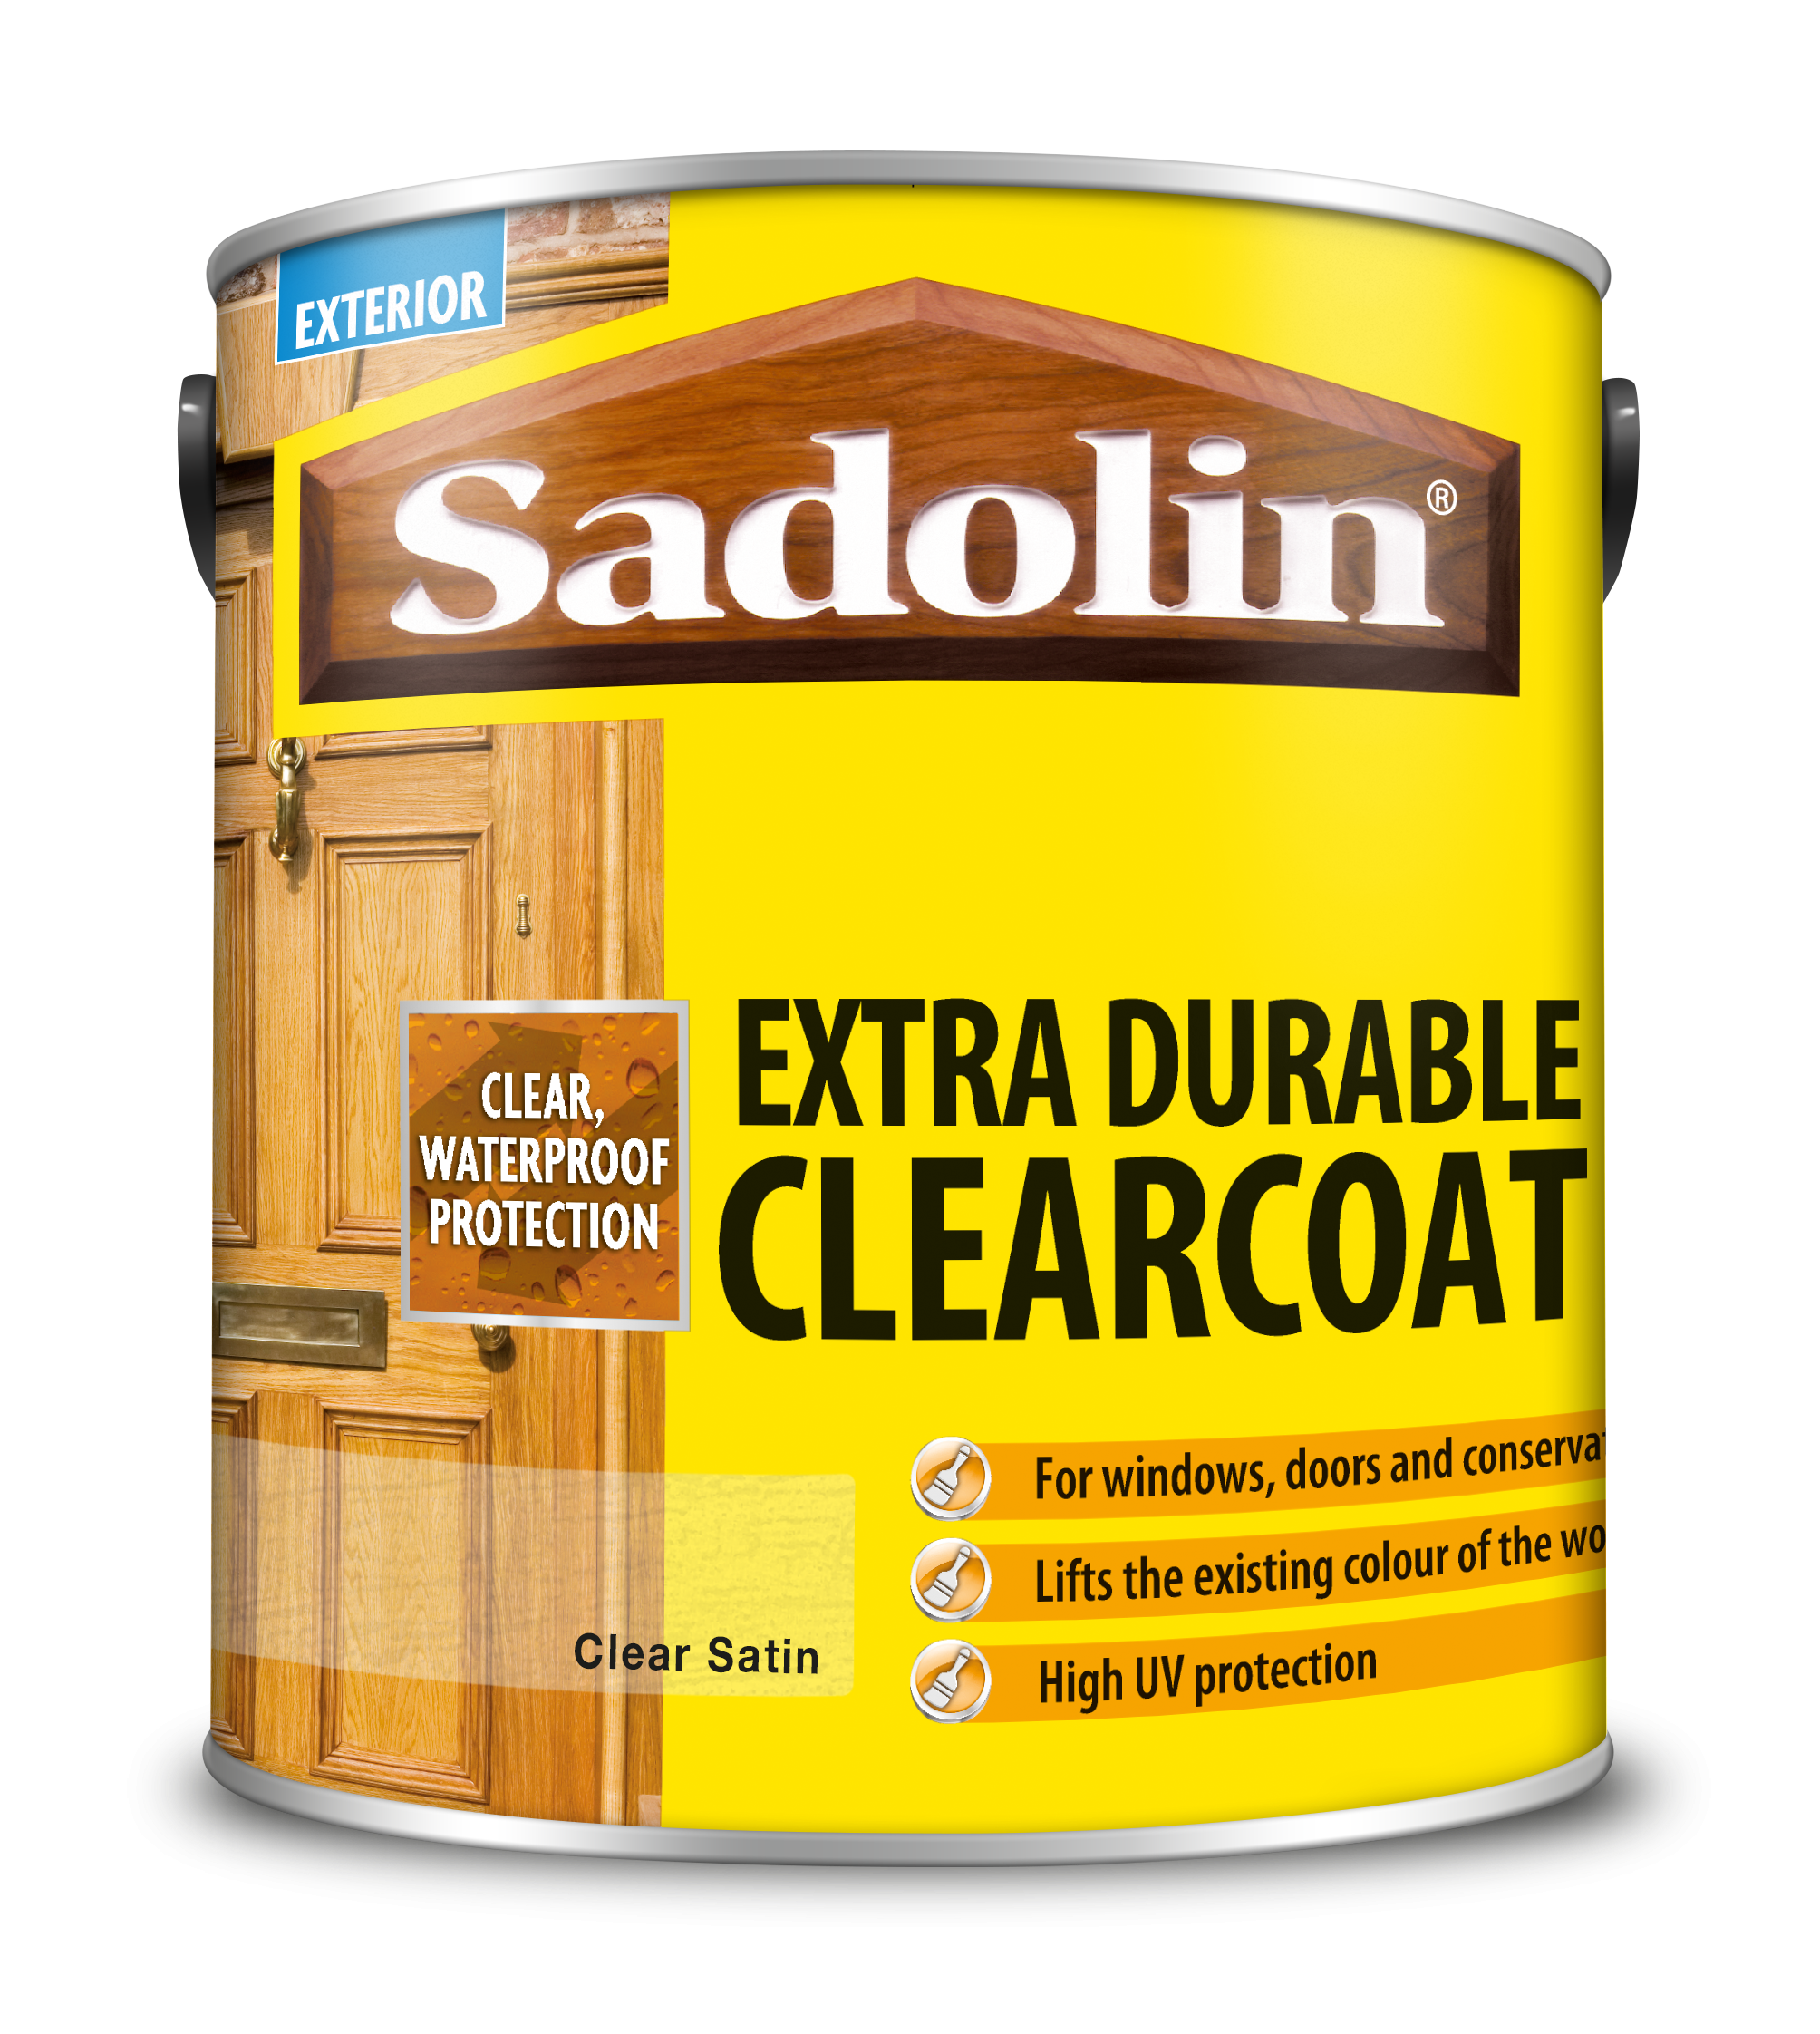 Sadolin Extra Durable Clearcoat Clear Satin 2.5L  5051842